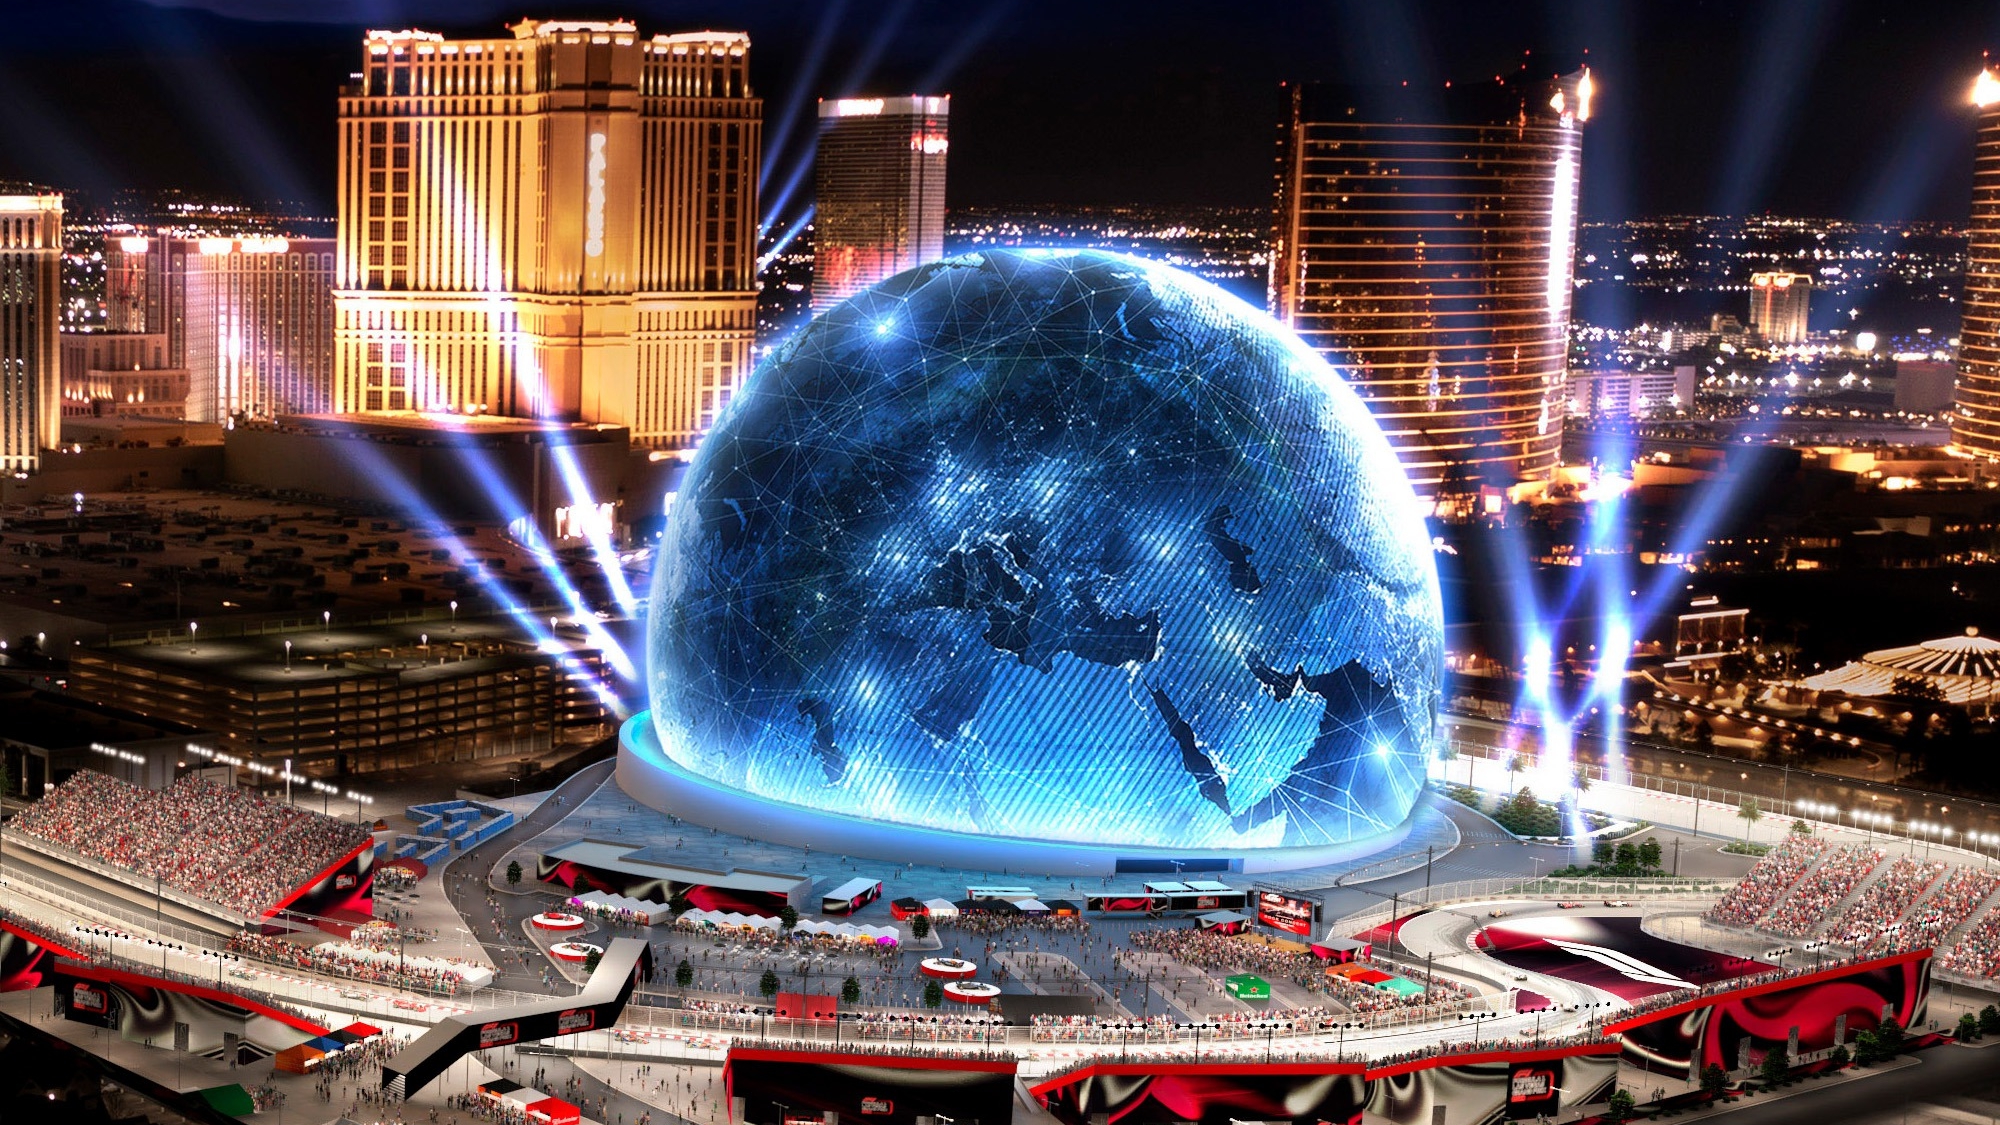 The Las Vegas Sphere this is this moon that has thousands of LED